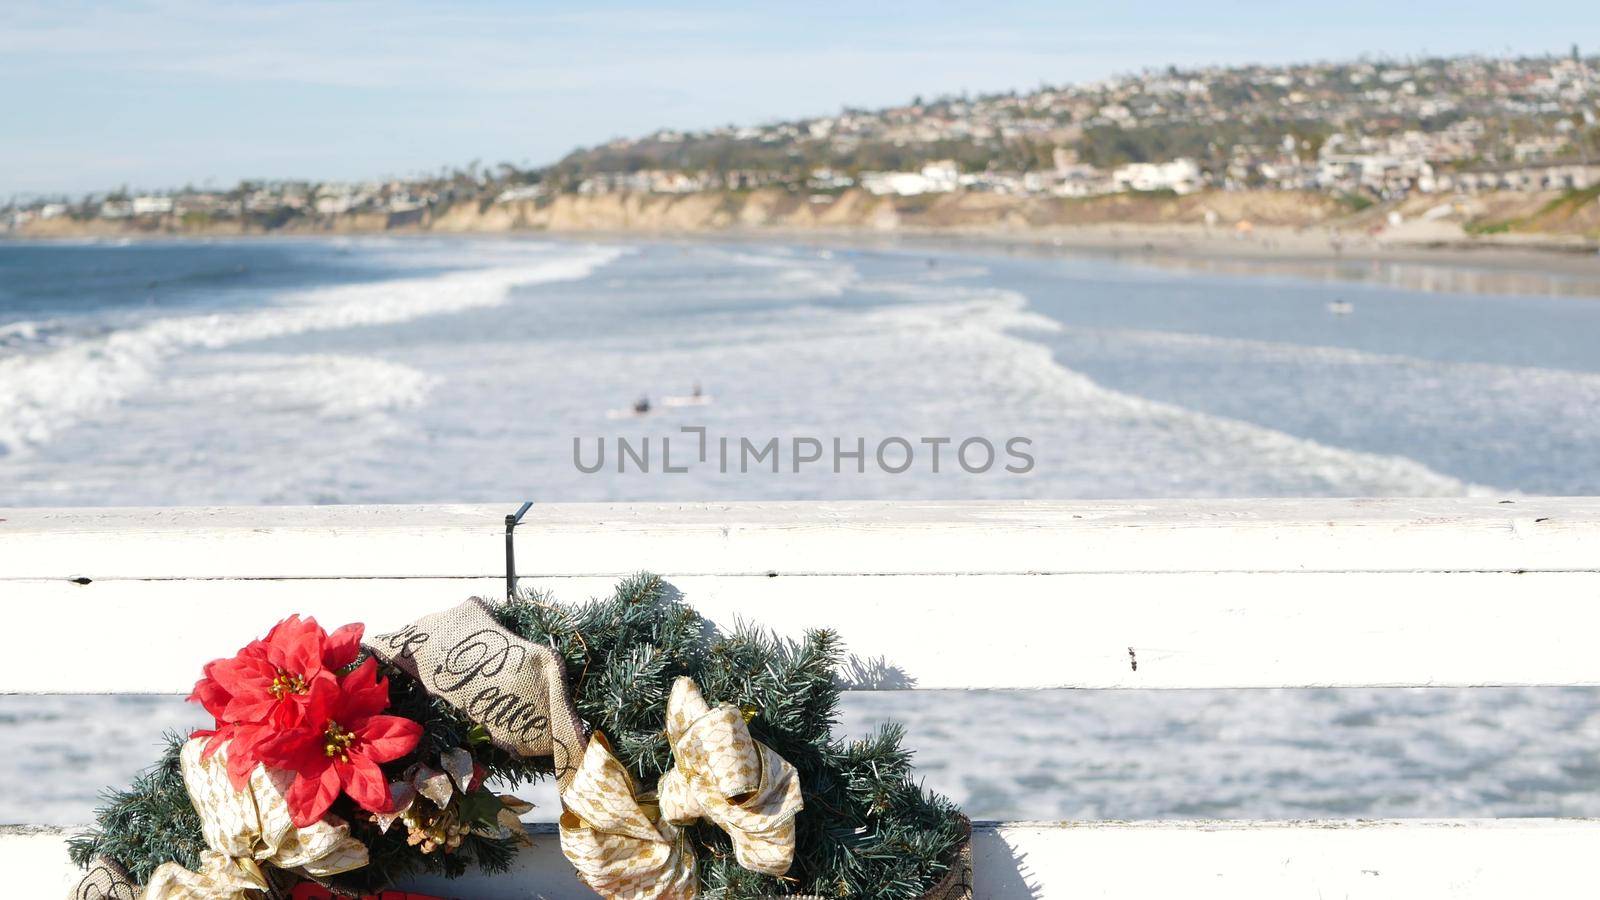 Christmas wreath on pier, New Year on ocean coast, California beach at Xmas. Decor from pine or fir tree for winter holidays over sea in USA. Festive decoration over summer seascape in December.